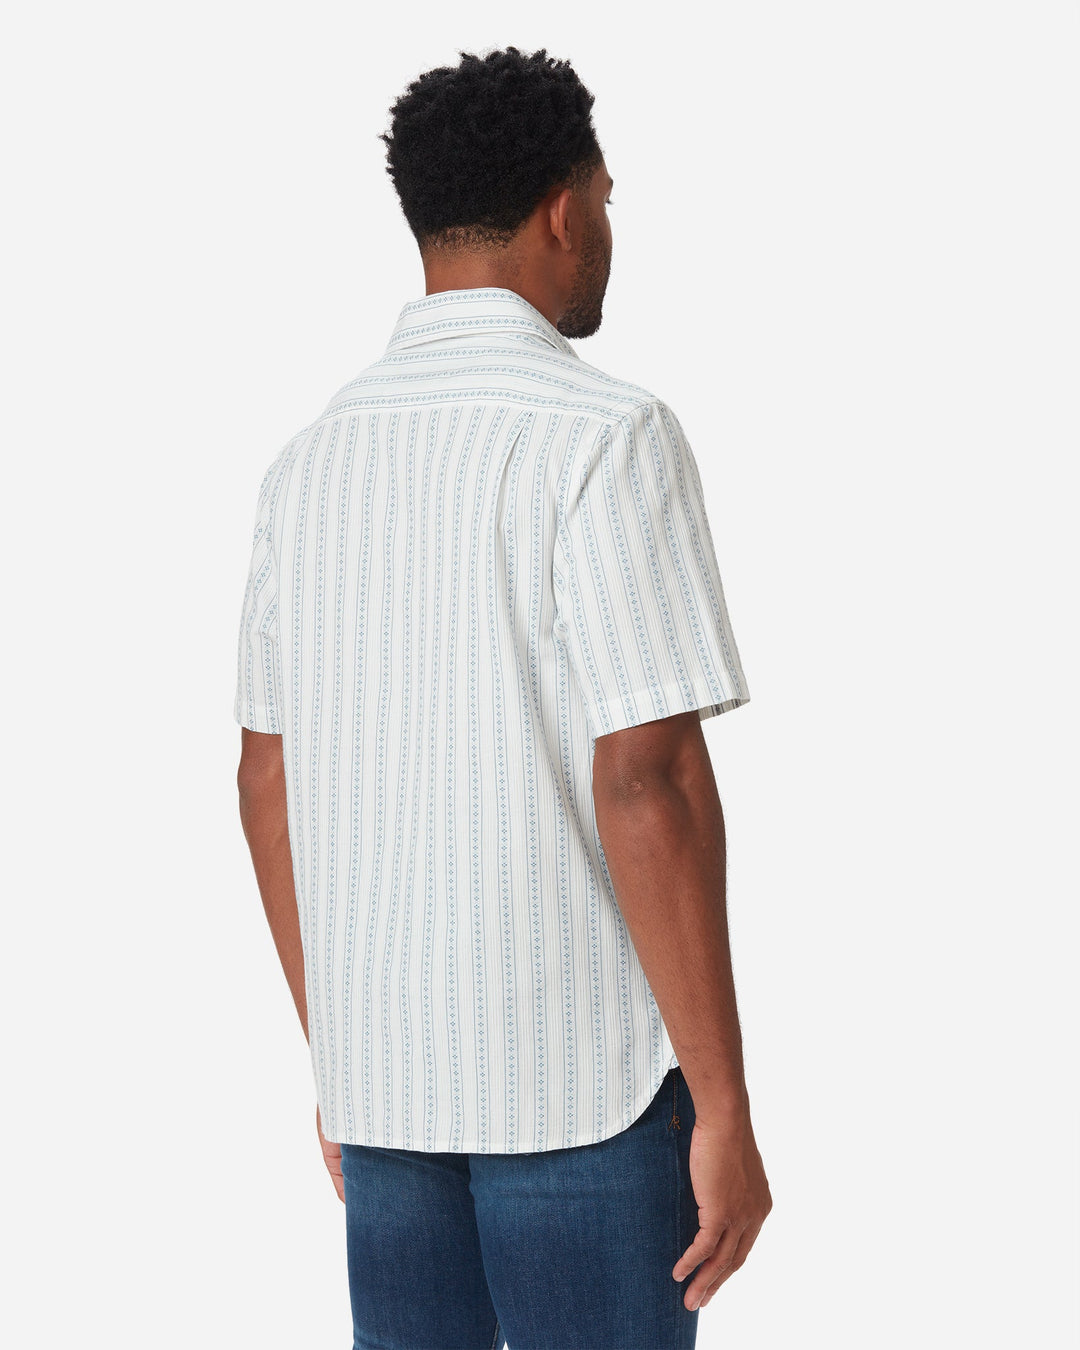 Model facing away with slightly rightward gaze wearing Ace rivington light-weight tailored shirt in off-white with light blue vertical stripes and dark blue diamond pattern within each stripe with pearl buttons and left-breast pocket and pair of Ace Rivington dirty vintage blue denim jeans with slight stylistic wear